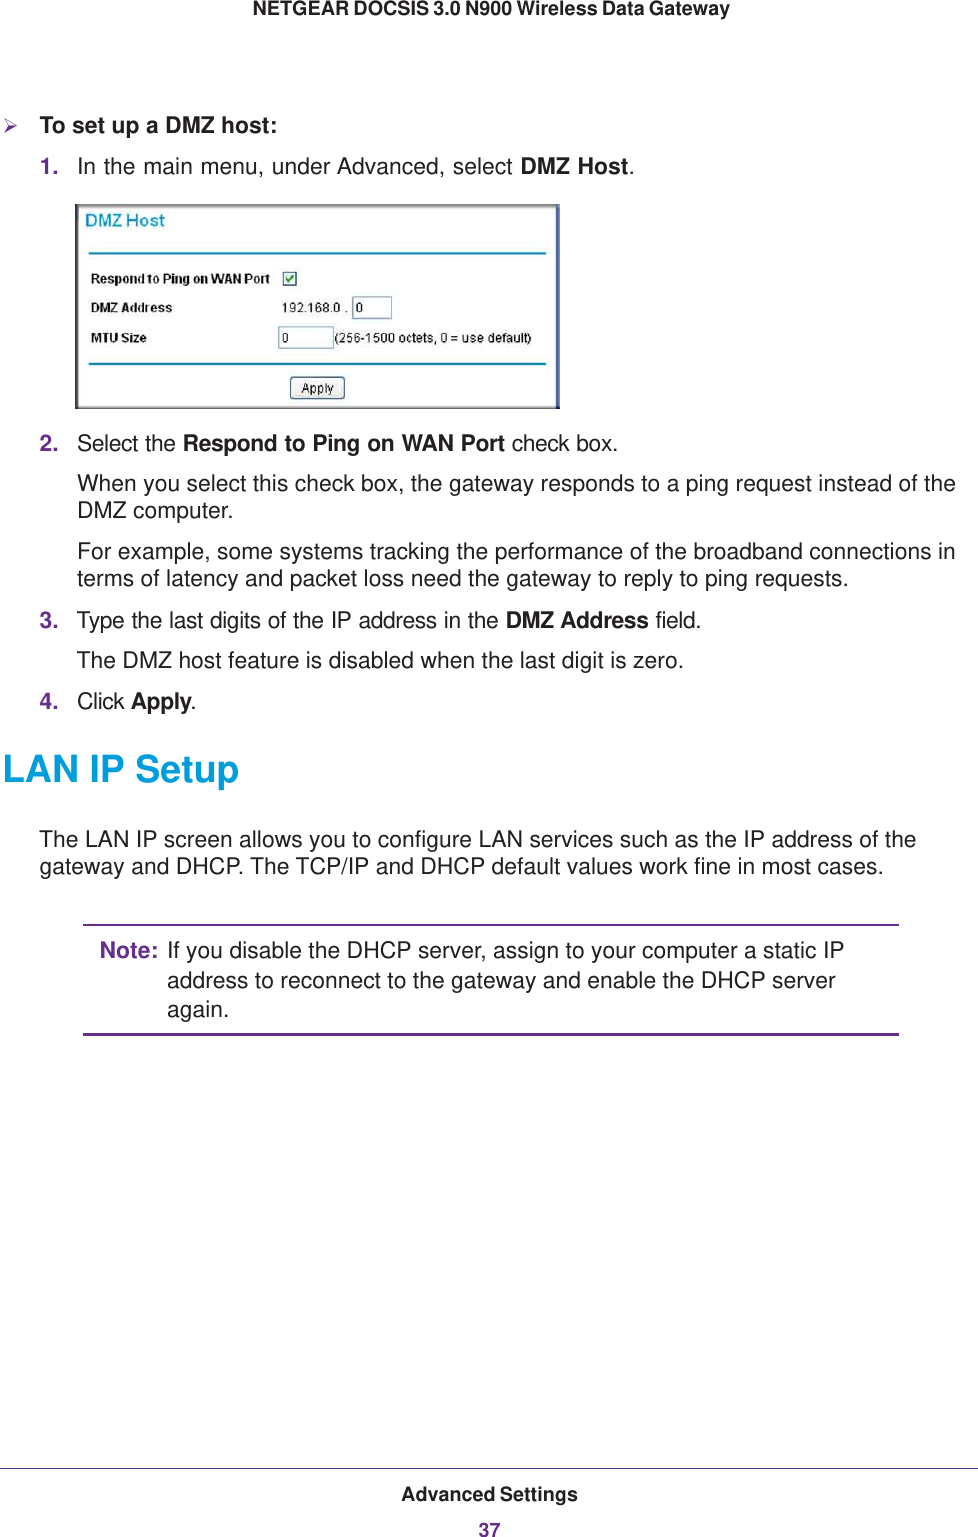 Advanced Settings37 NETGEAR DOCSIS 3.0 N900 Wireless Data GatewayTo set up a DMZ host:1. In the main menu, under Advanced, select DMZ Host. 2. Select the Respond to Ping on WAN Port check box.When you select this check box, the gateway responds to a ping request instead of the DMZ computer.For example, some systems tracking the performance of the broadband connections in terms of latency and packet loss need the gateway to reply to ping requests.3. Type the last digits of the IP address in the DMZ Address field.The DMZ host feature is disabled when the last digit is zero.4. Click Apply.LAN IP SetupThe LAN IP screen allows you to configure LAN services such as the IP address of the gateway and DHCP. The TCP/IP and DHCP default values work fine in most cases. Note: If you disable the DHCP server, assign to your computer a static IP address to reconnect to the gateway and enable the DHCP server again.